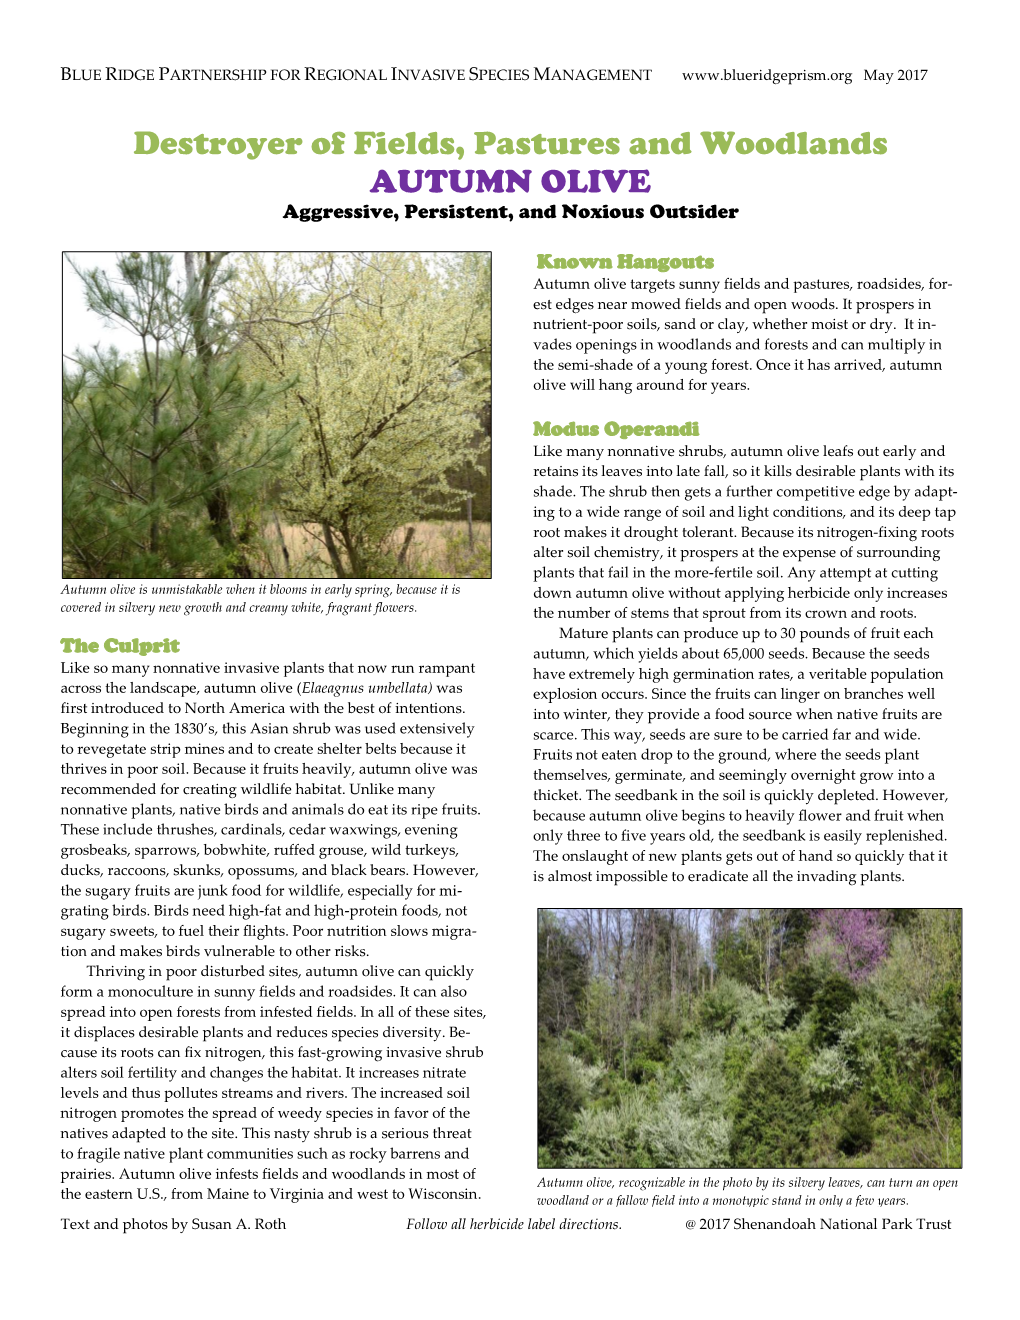 AUTUMN OLIVE Aggressive, Persistent, and Noxious Outsider